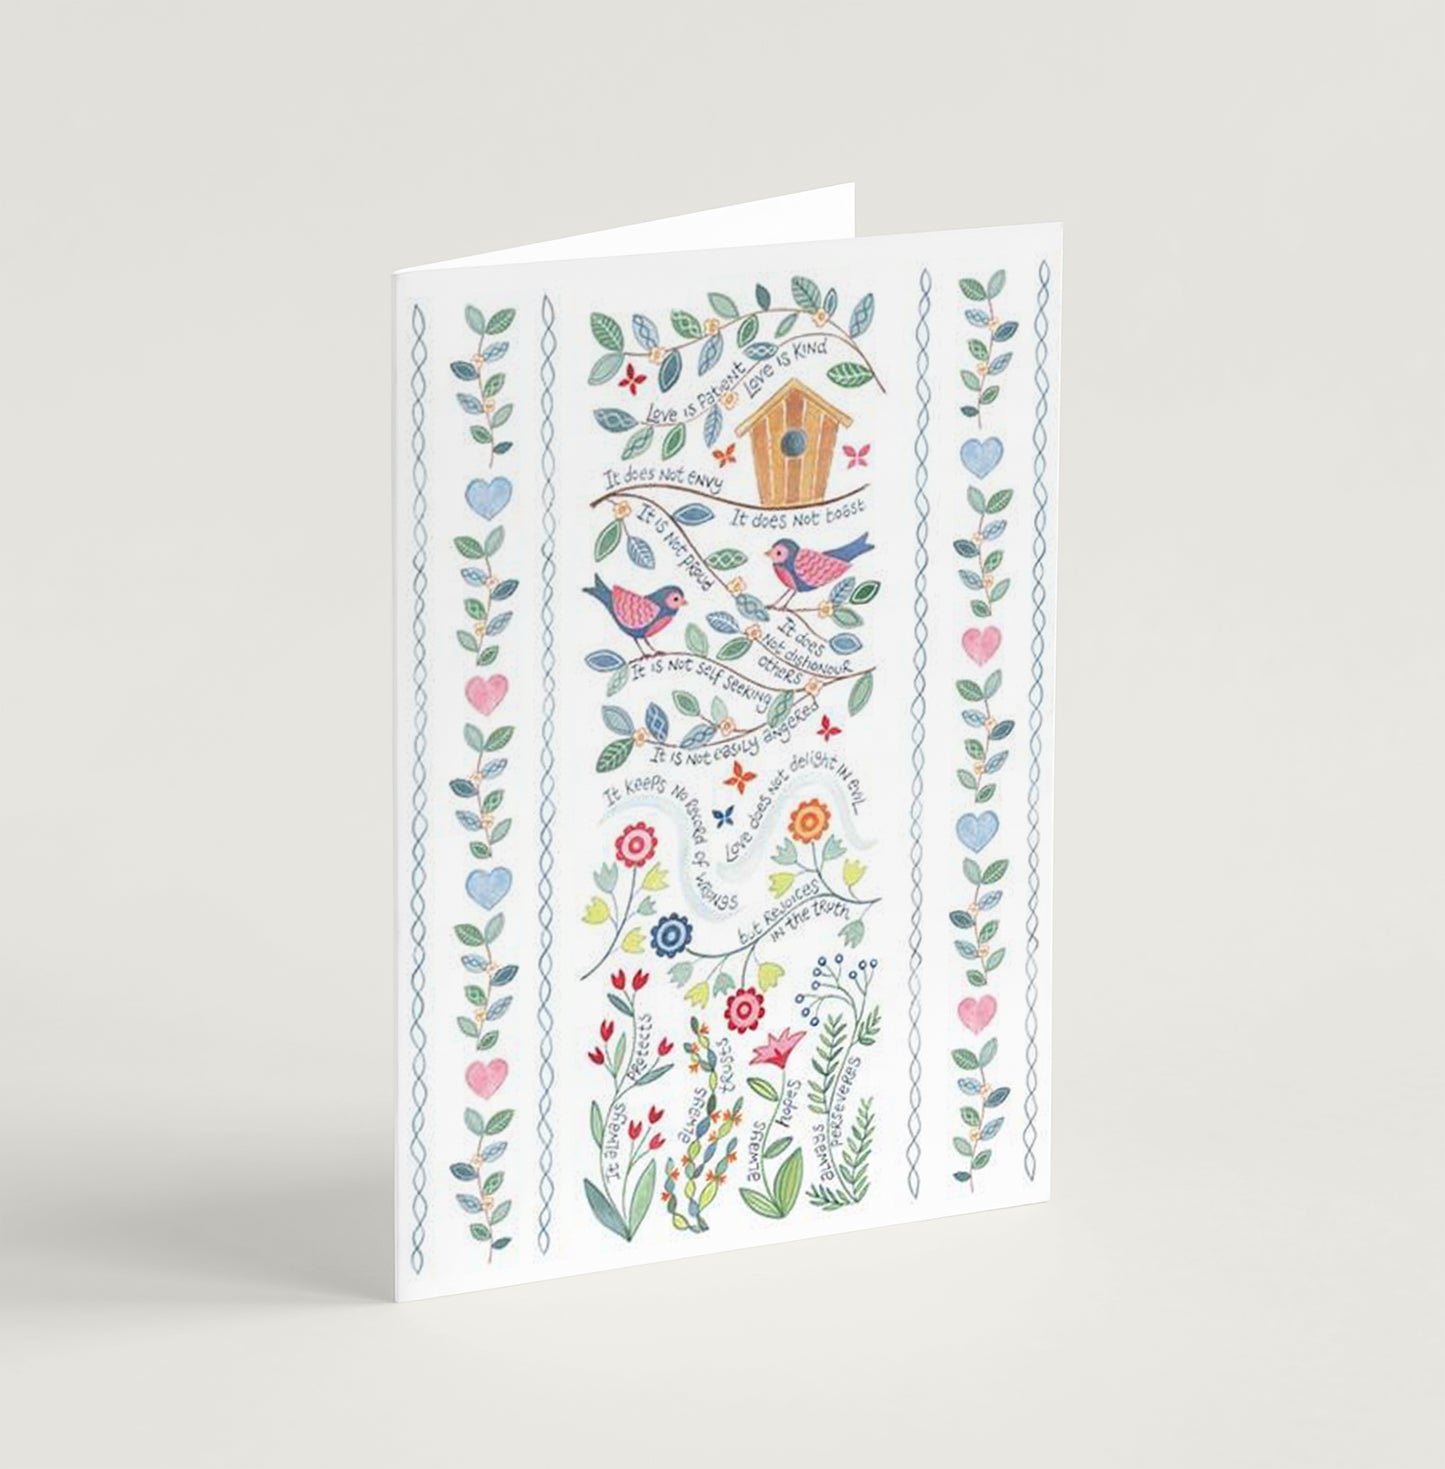 'Love is Patient' by Hannah Dunnett - Greetings Card